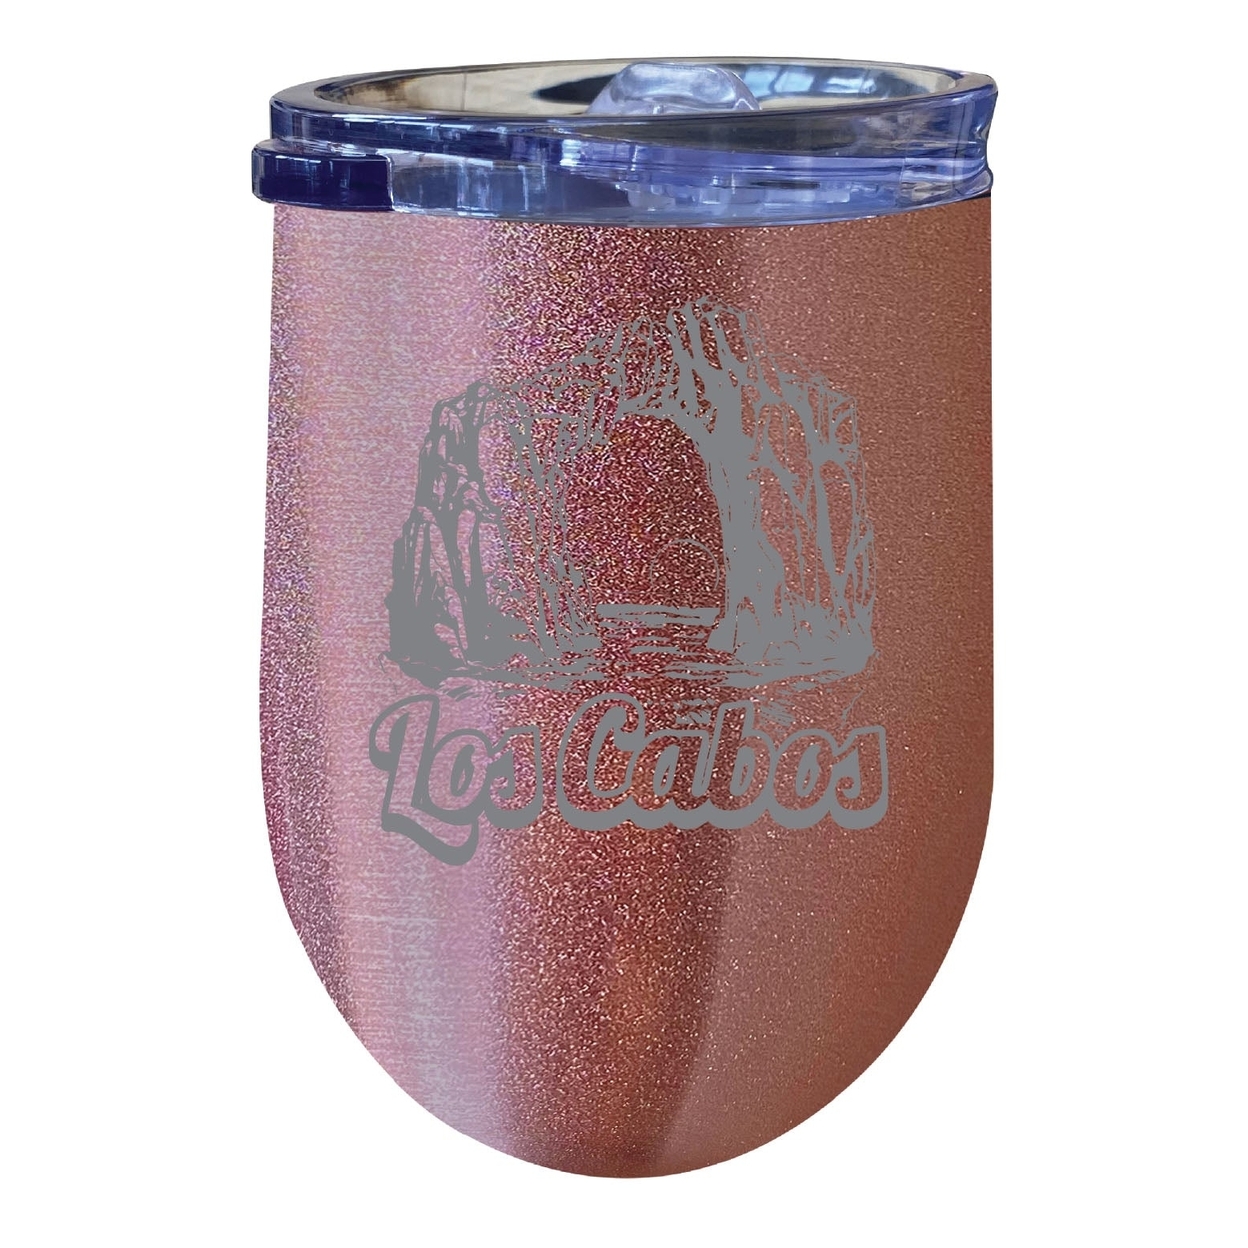 Los Cabos Mexico Souvenir 12 Oz Engraved Insulated Wine Stainless Steel Tumbler - Rose Gold,,4-Pack